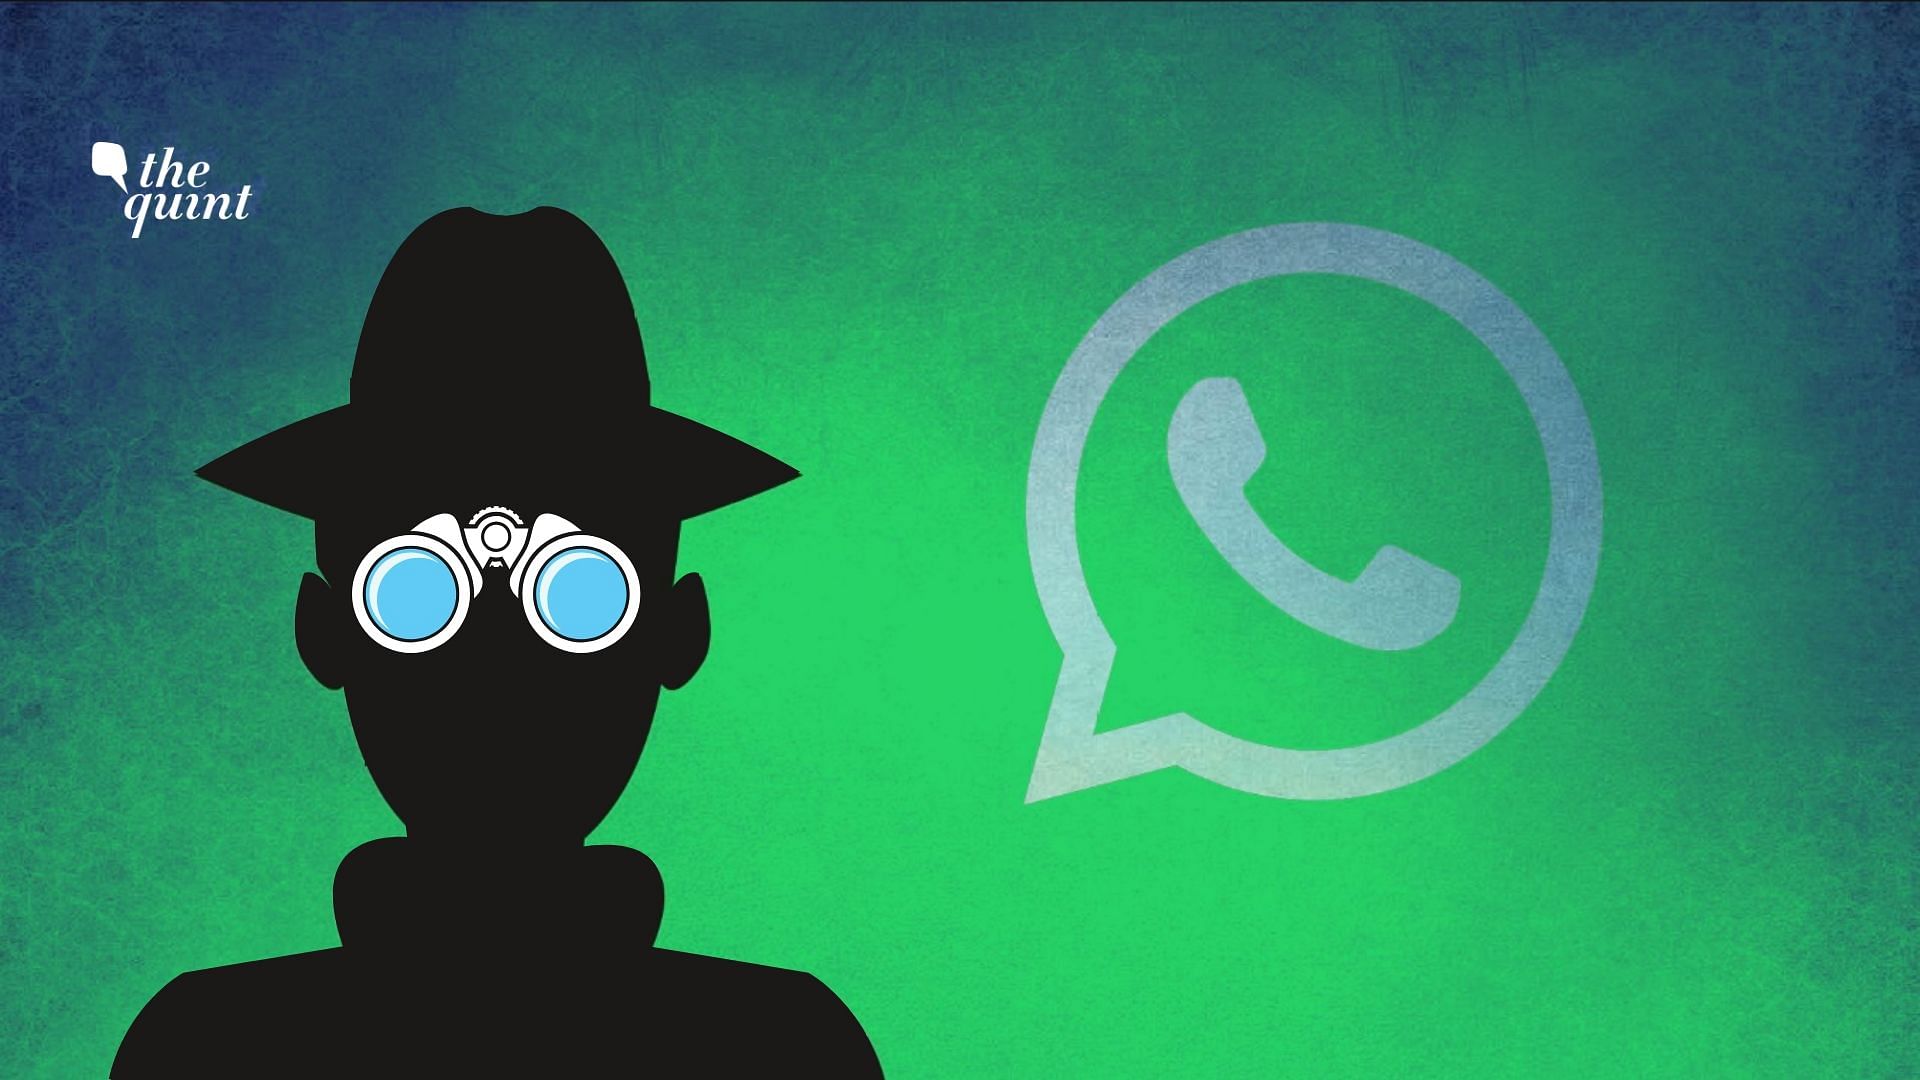 Two parliamentary panels headed by Congress leaders have decided to examine the WhatsApp snooping case.